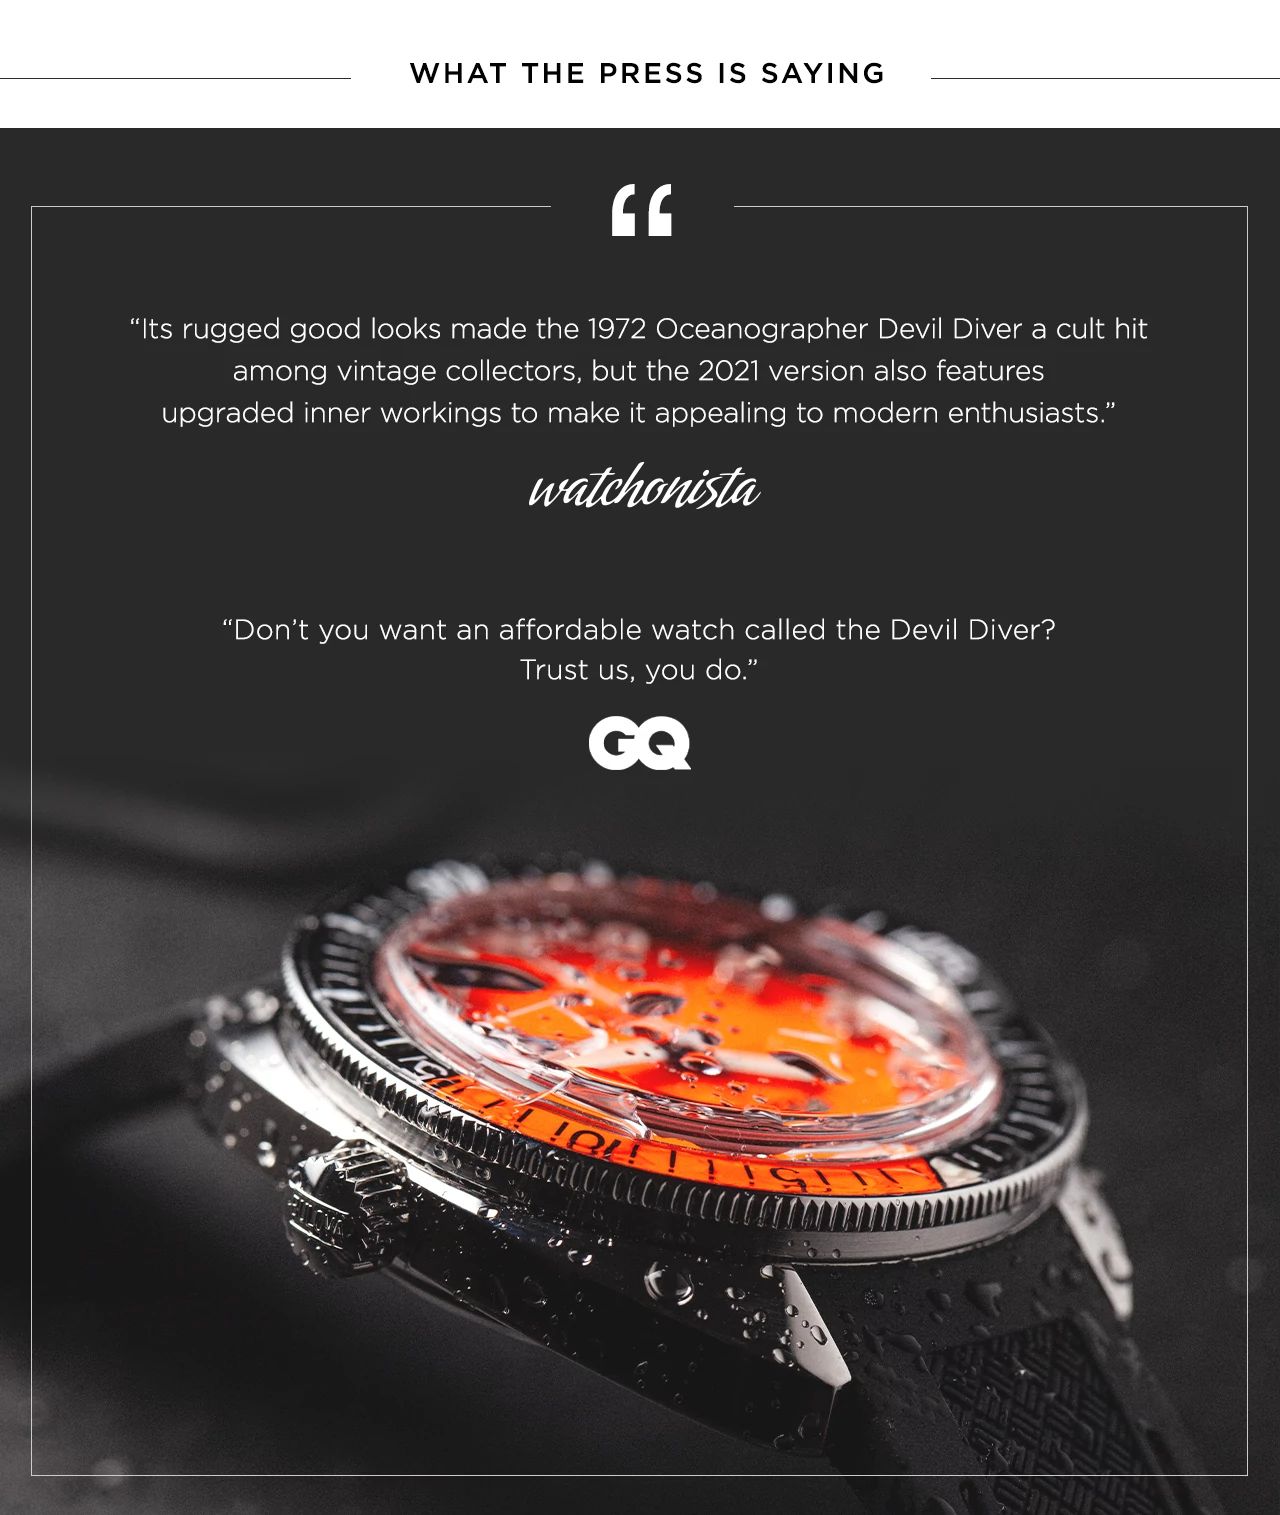 “Its rugged good looks made the 1972 Oceanographer Devil Diver a cult hit among vintage collectors, but the 2021 version also features upgraded inner workings to make it appealing to modern enthusiasts.” - watchonista. And “Don’t you want an affordable watch called the Devil Diver? Trust us, you do.” - GQ